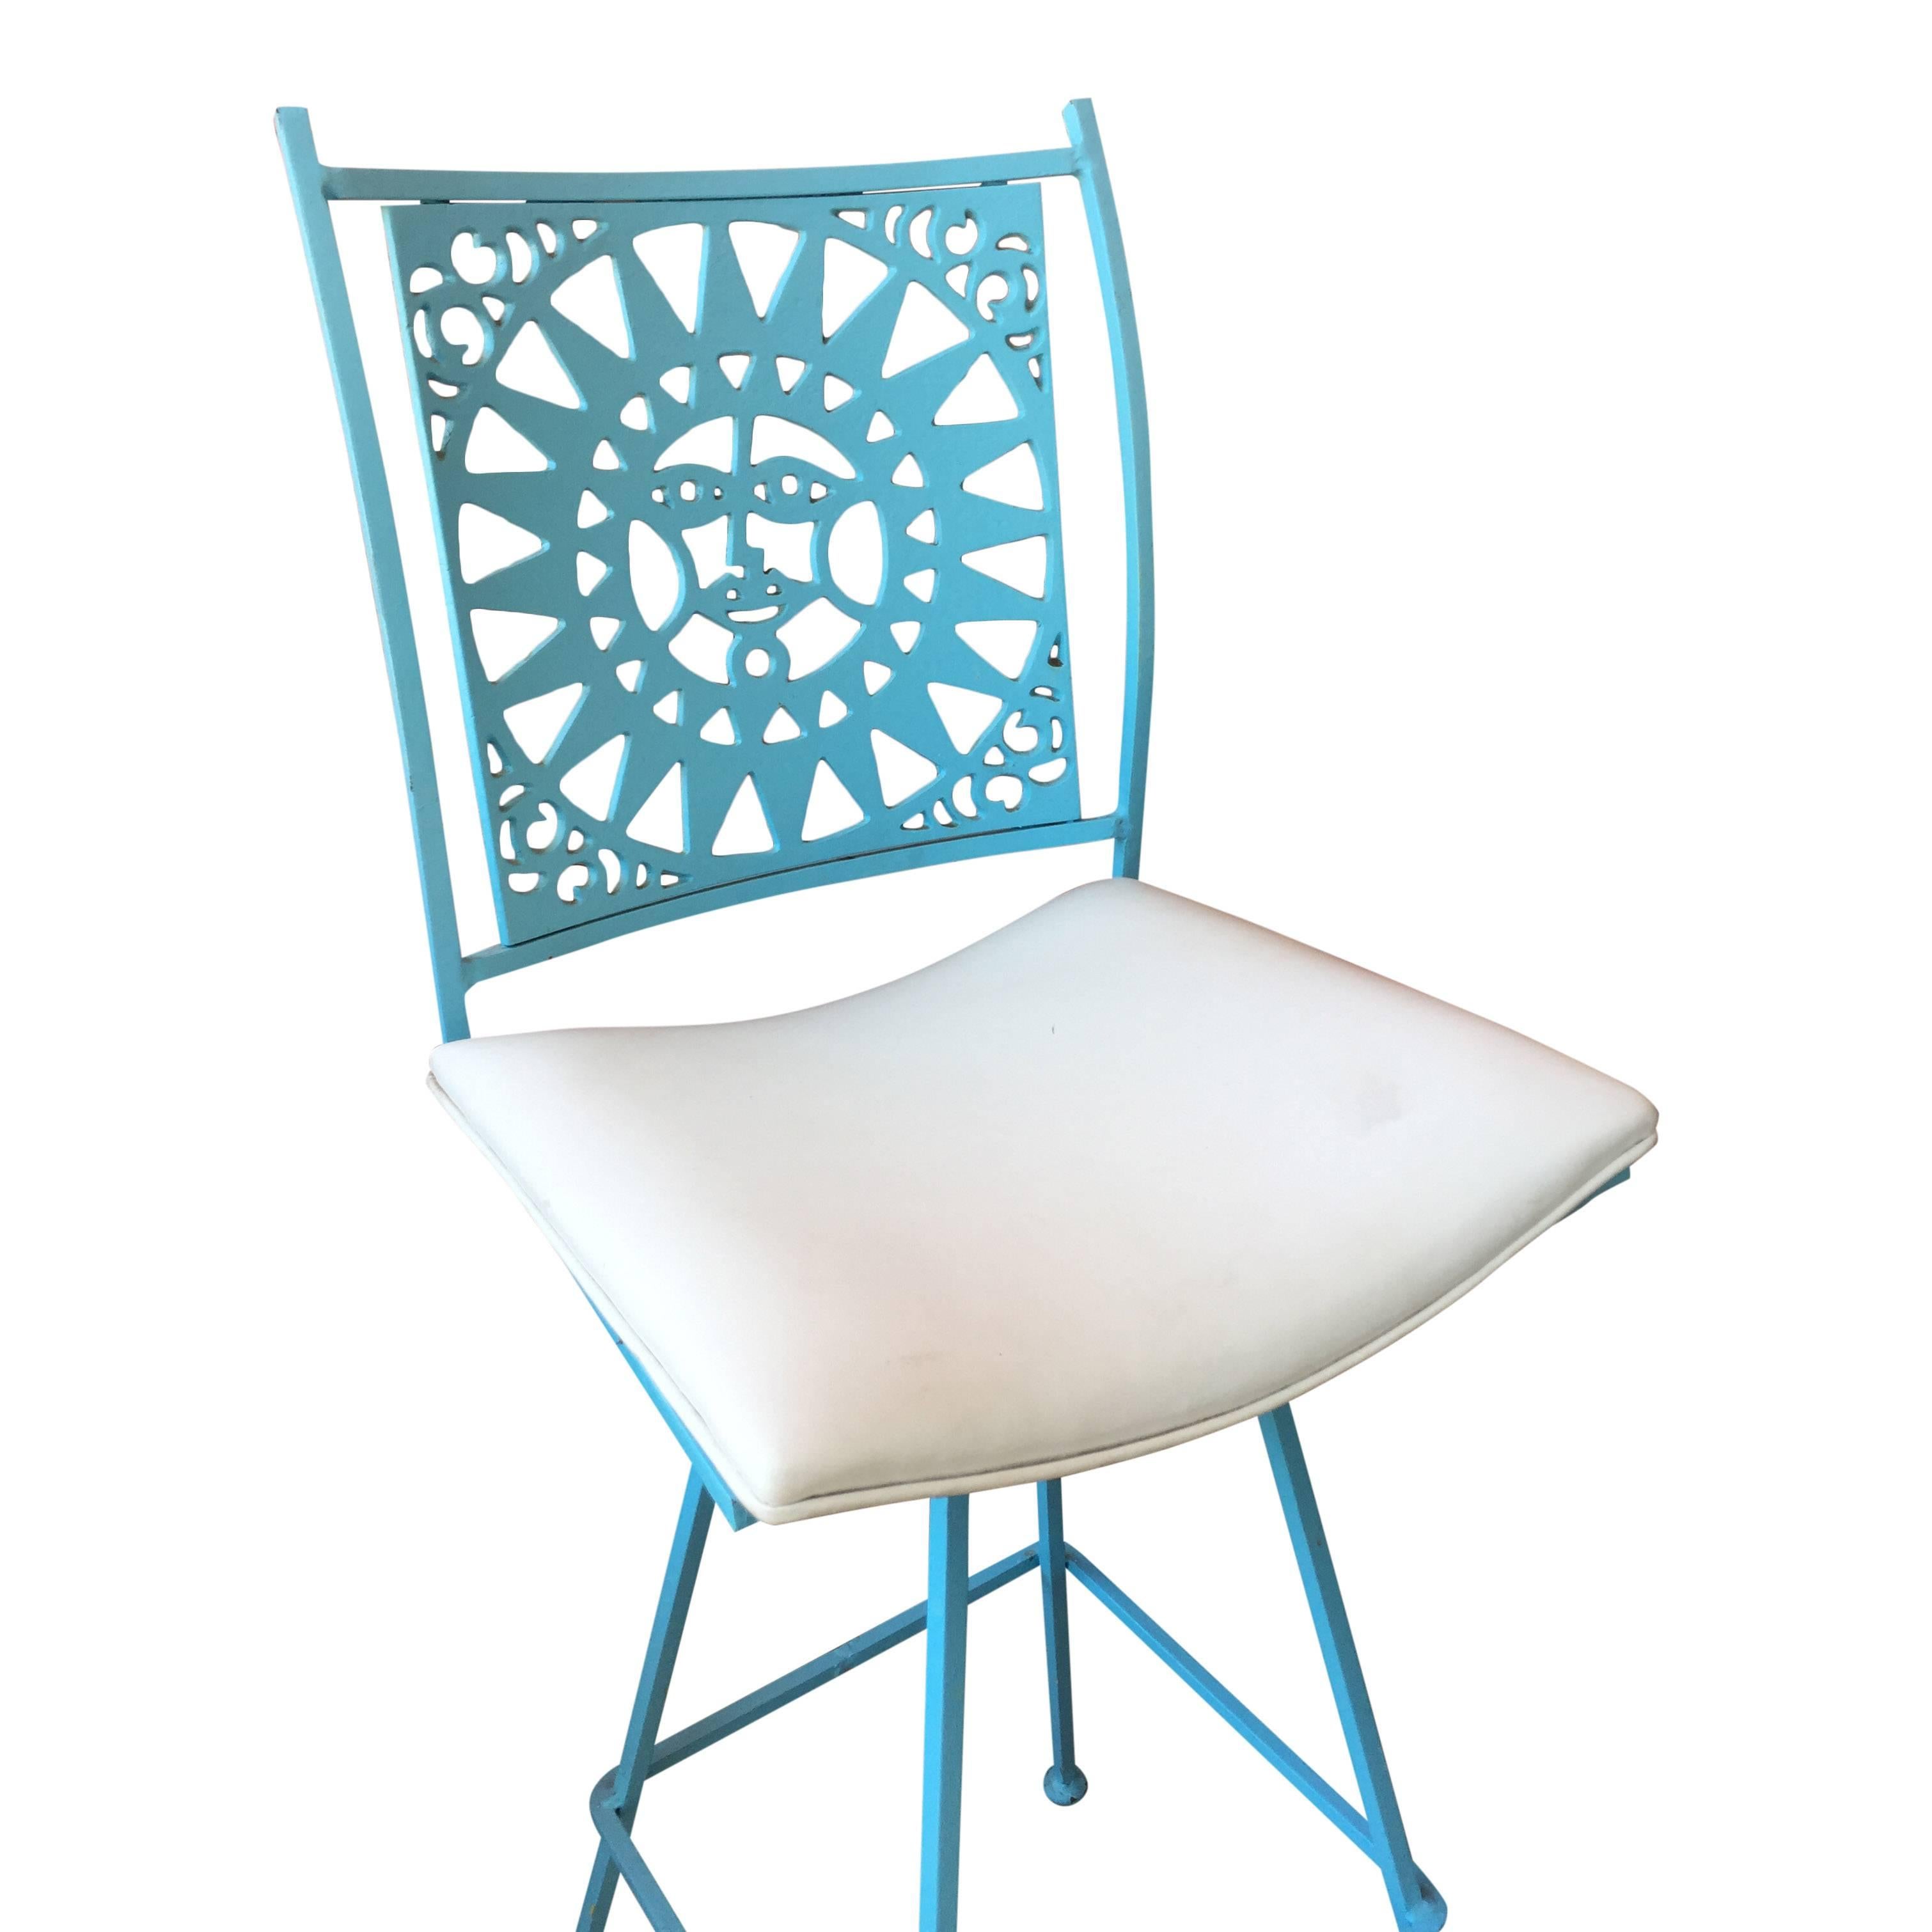 For your consideration are a great pair of Arthur Umanoff barstools.

Playfully bright, these baby blue stools feature iron frames and a sun patterned face on the seat back a la Alexander Girard.

The chairs swivel.

Measures: 47 in H, 16 in